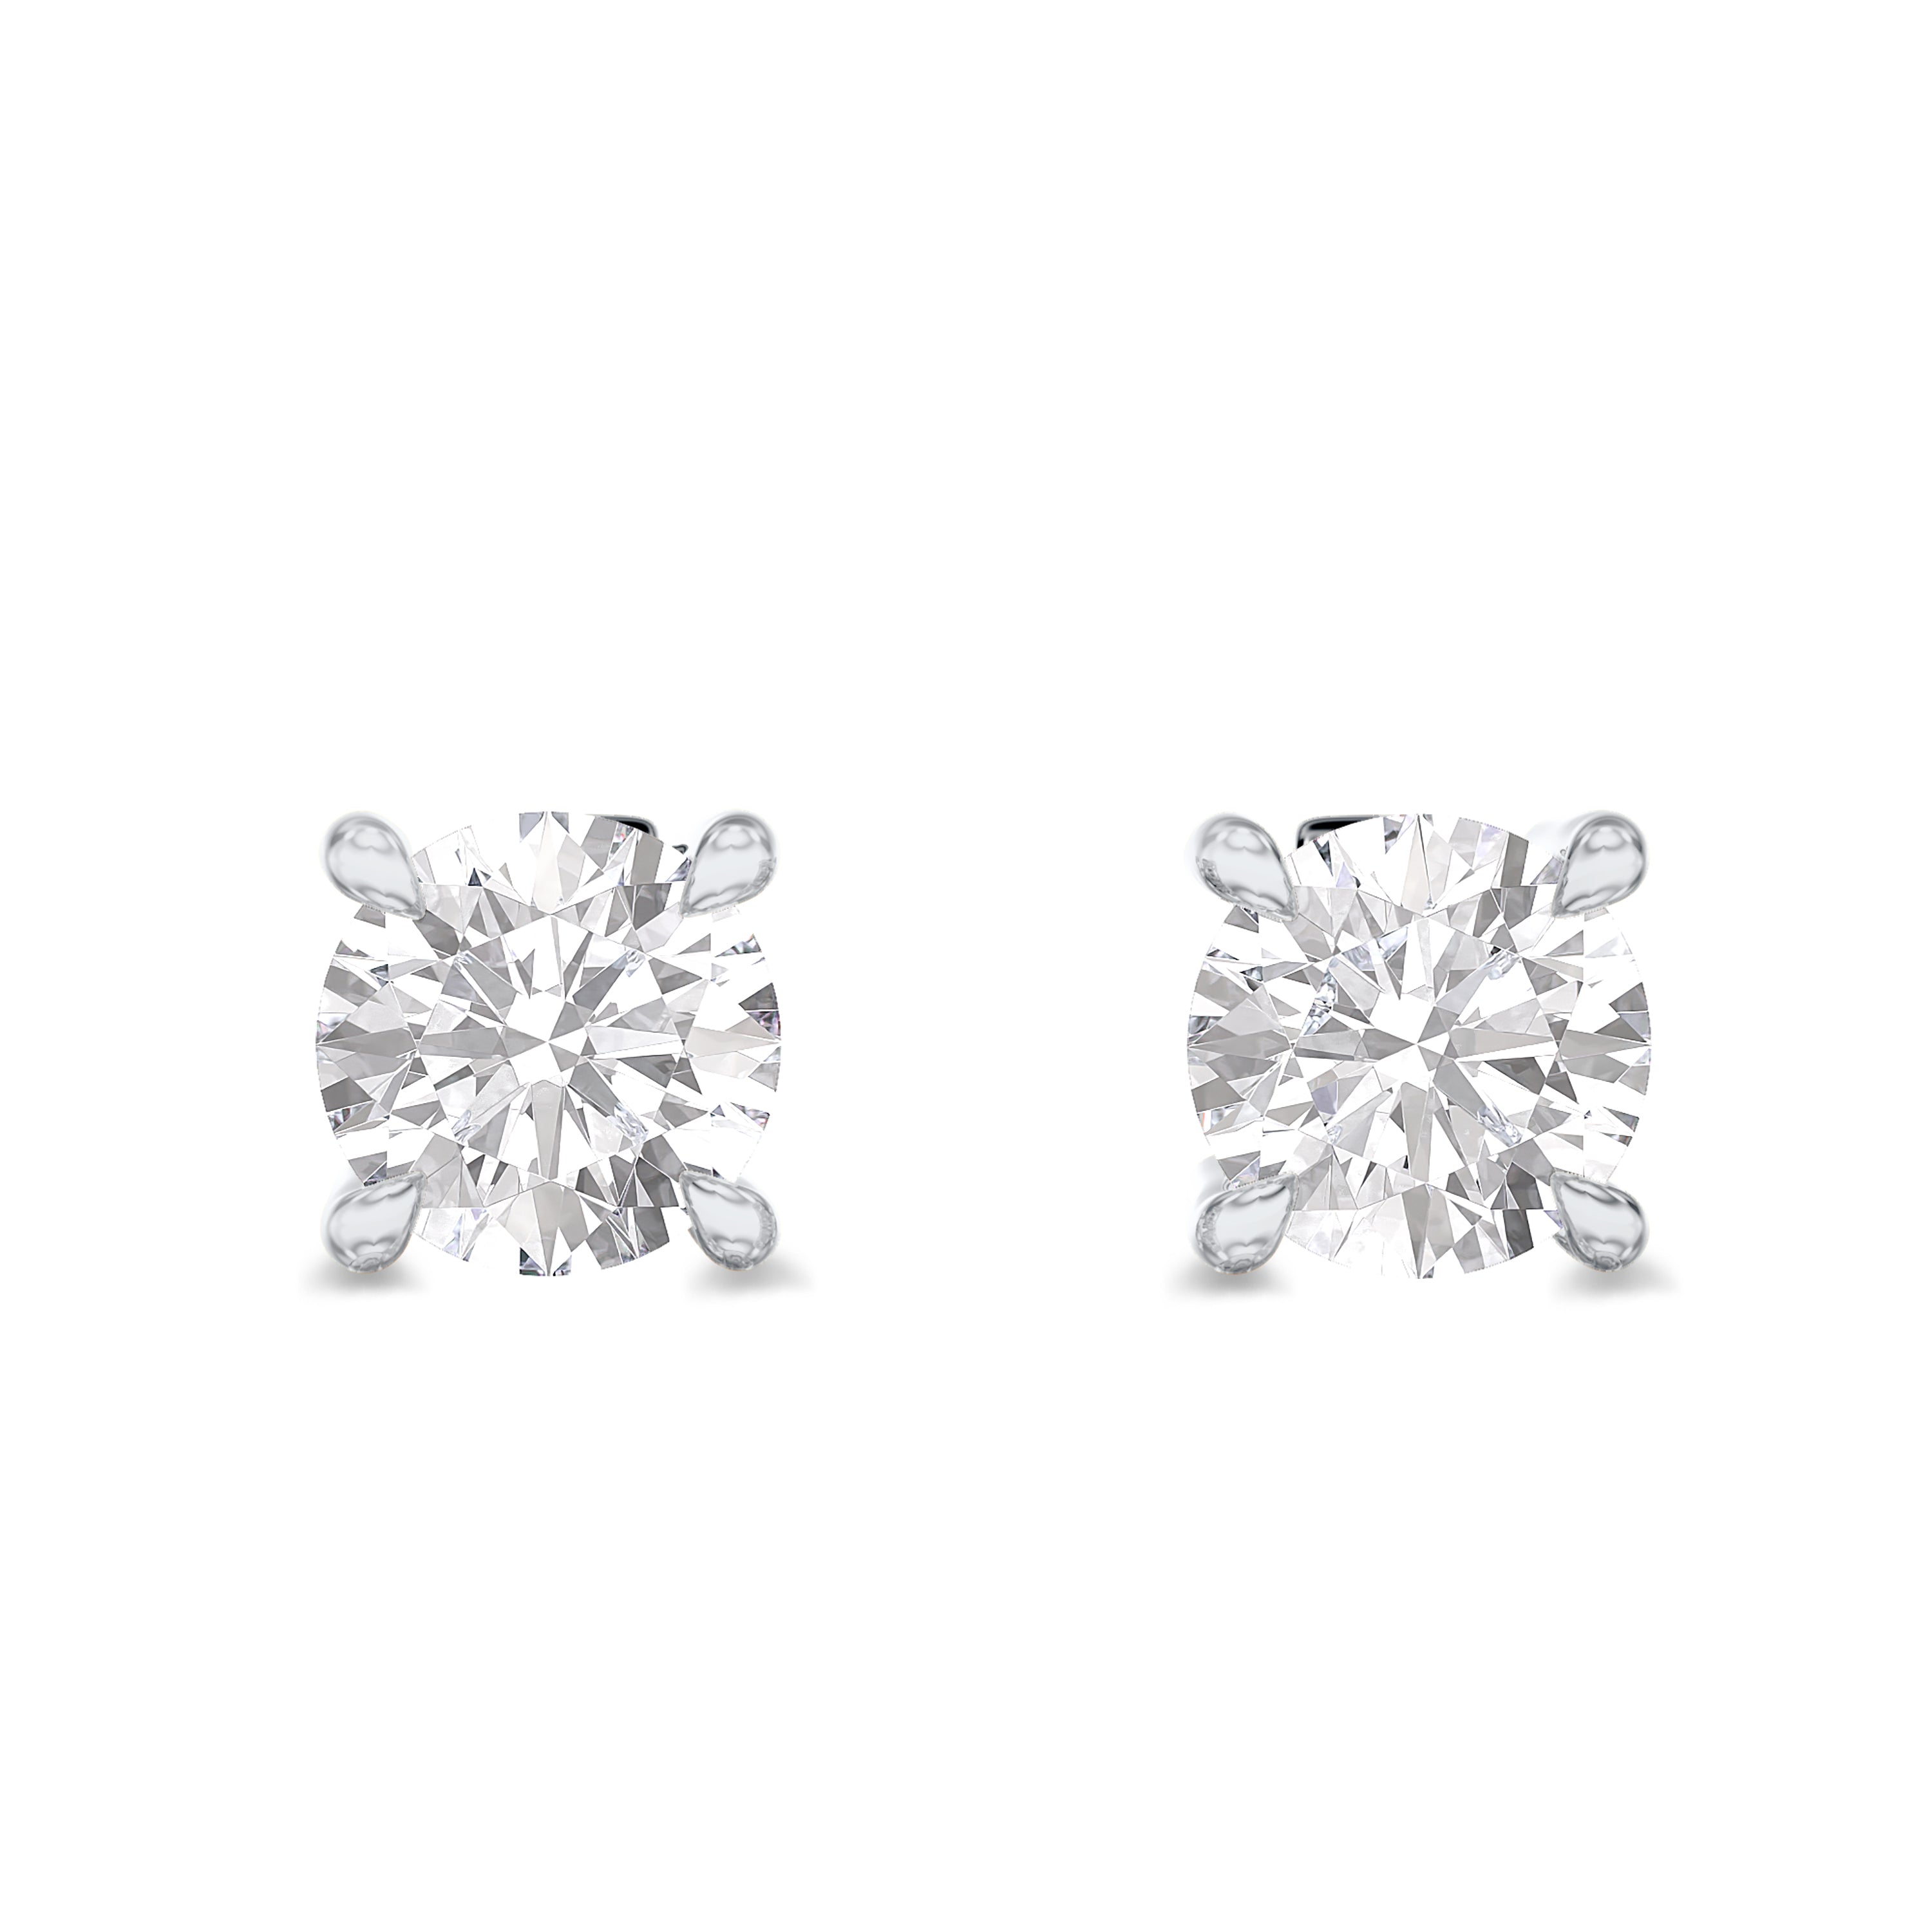 0.85 carat lab grown solitaire diamond earrings in 18k gold, E-F color, VS-SI clarity